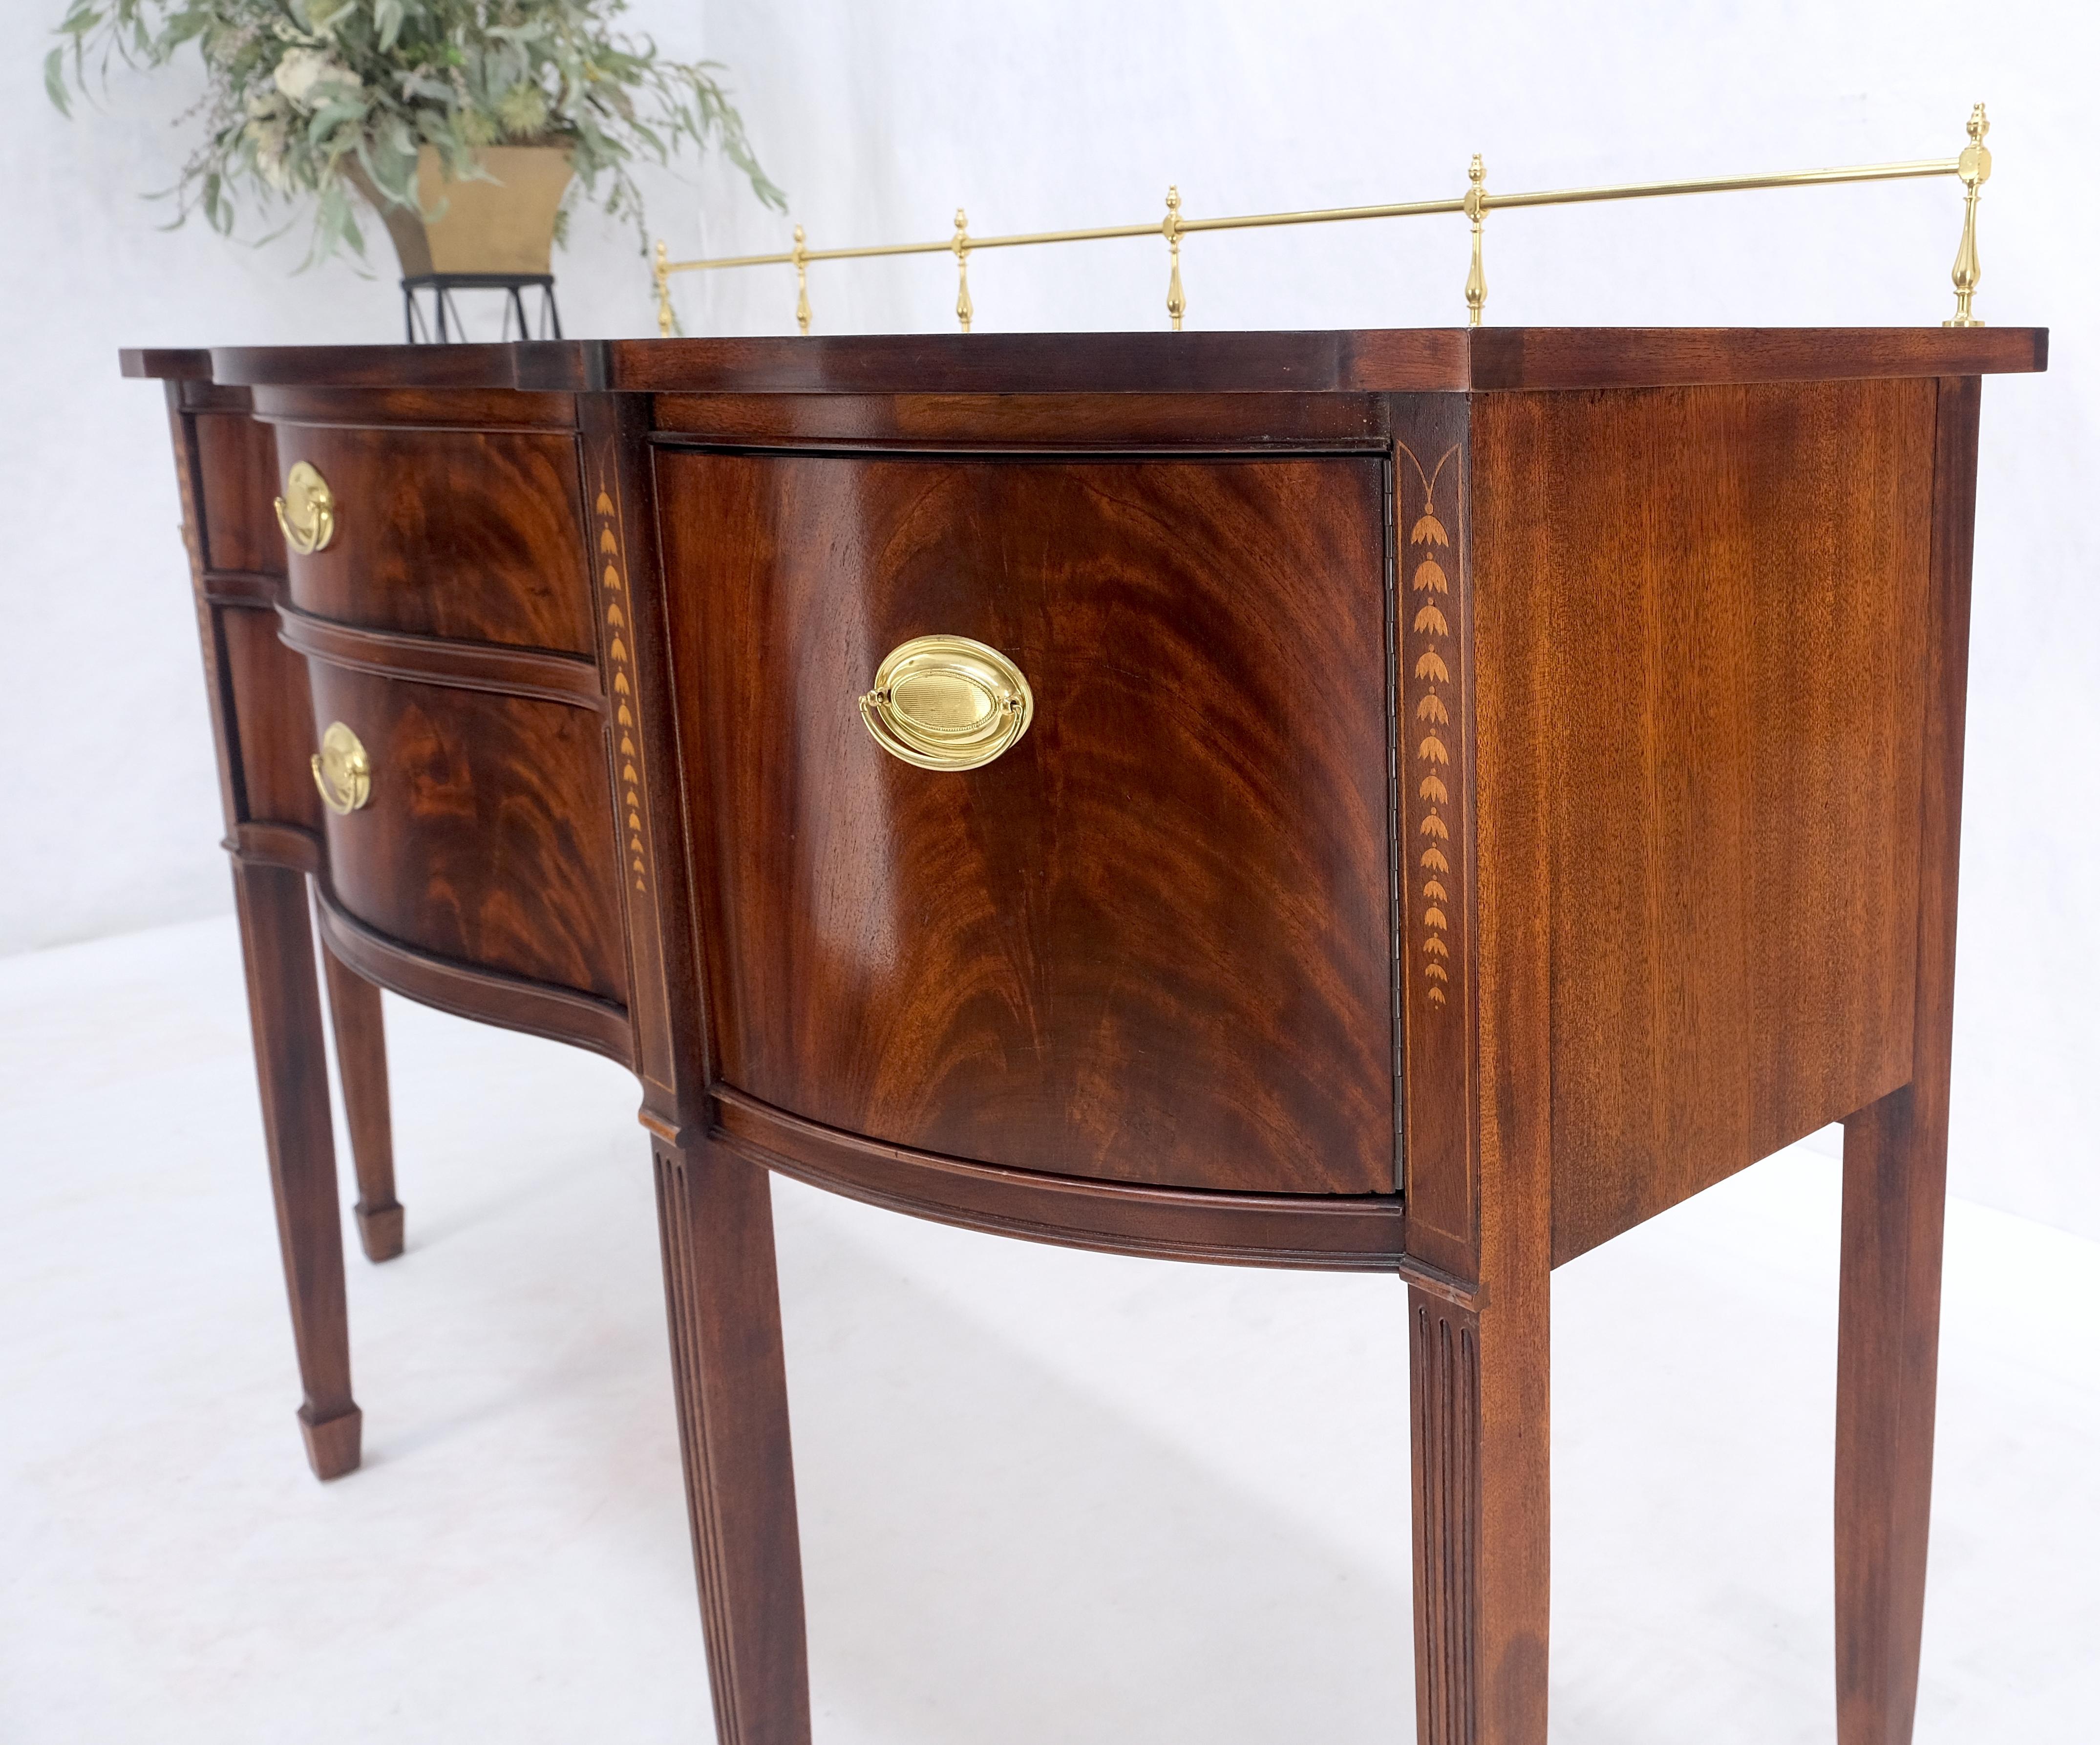 MINT Brass Gallery Crotch Mahogany Serpentine Front Federal Sideboard by Thomasville.